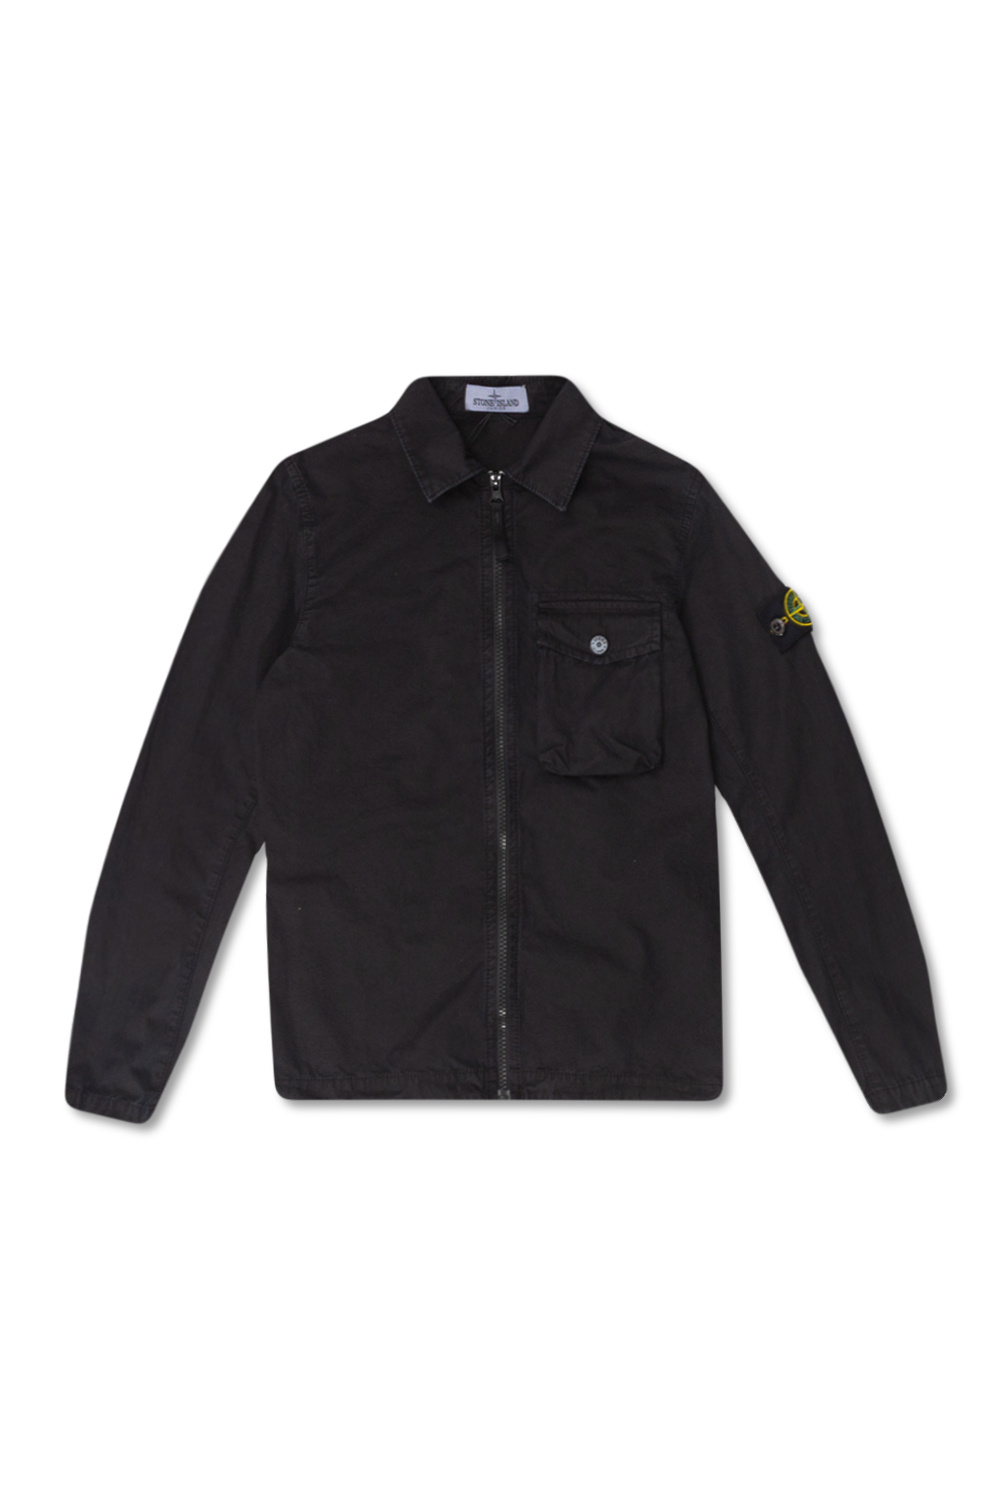 Stone Island Kids Under Armour Forefront Printed jacket